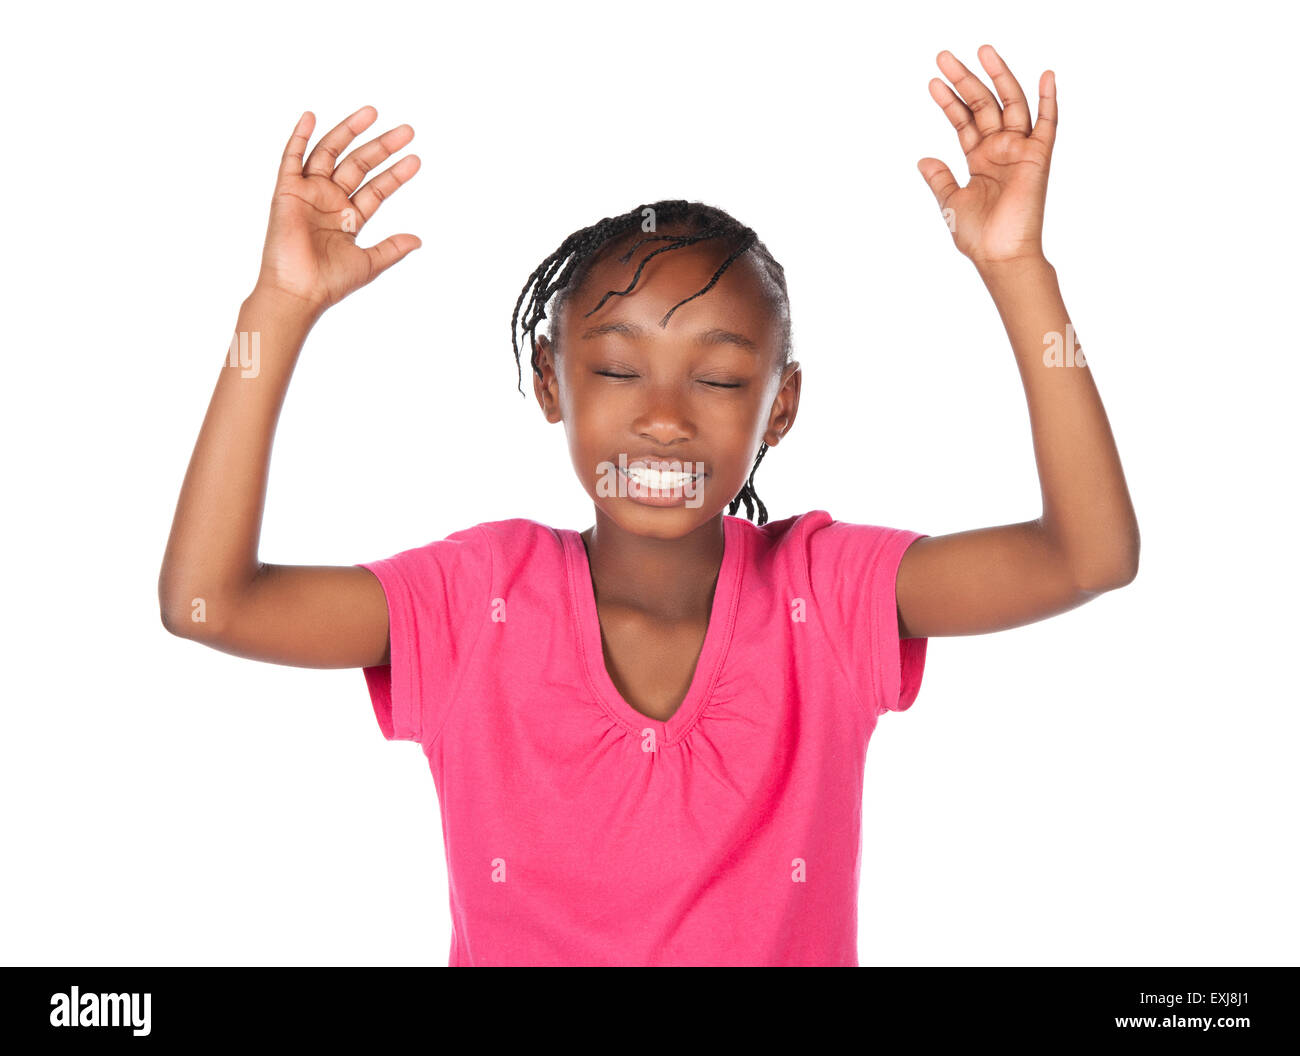 Adorable small african child with braids wearing a bright pink shirt. The girl is worshipping with her hands lifted up. Stock Photo